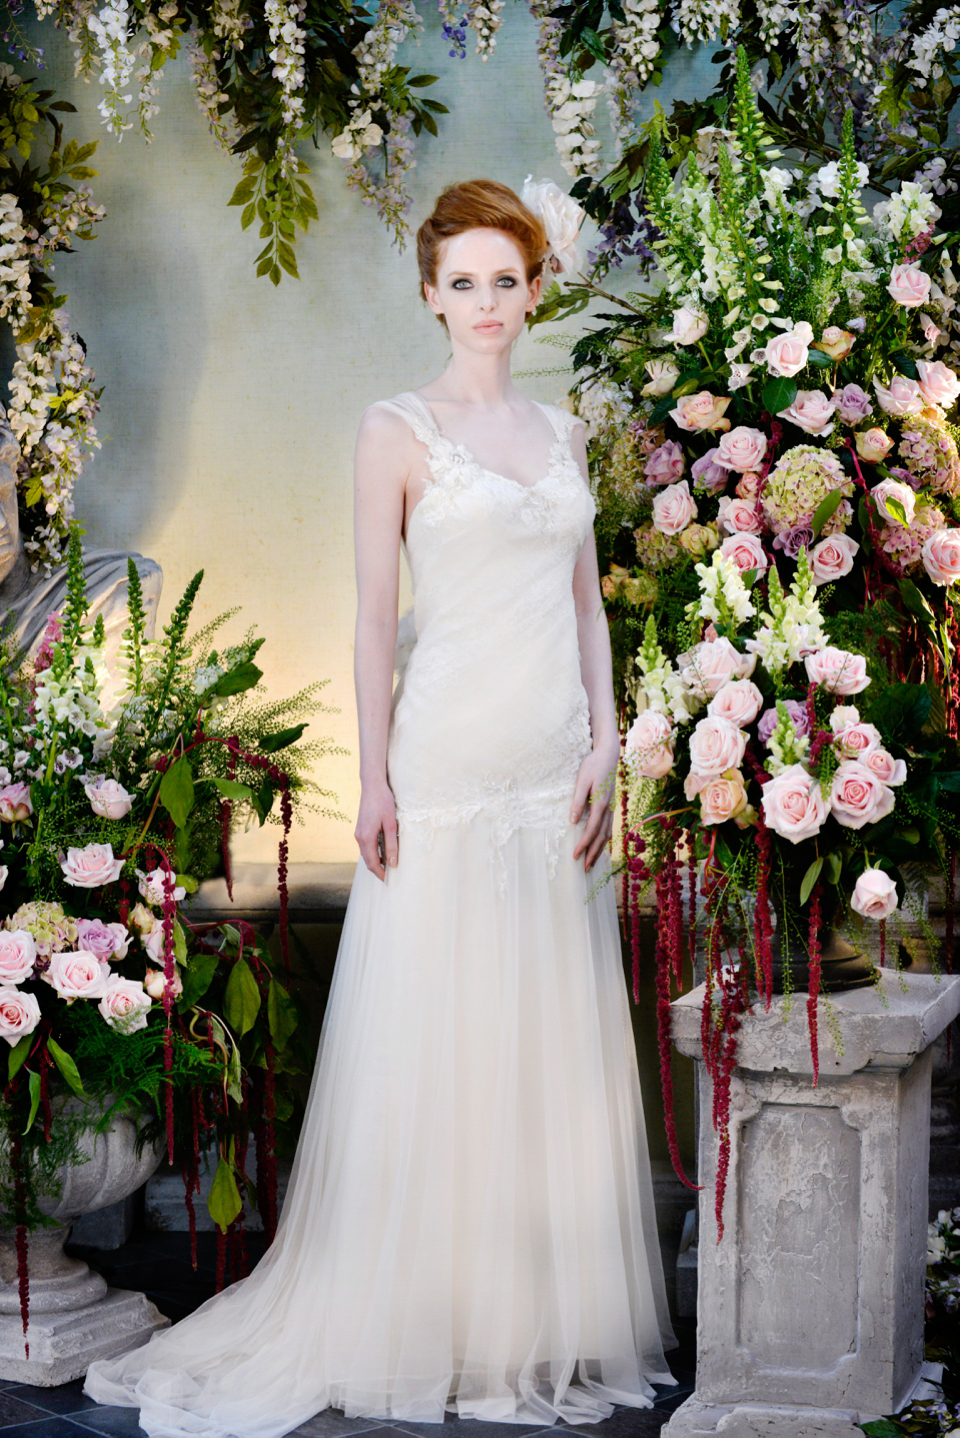 Mesmerise Wedding Dress from Terry Fox's Siren Song Collection